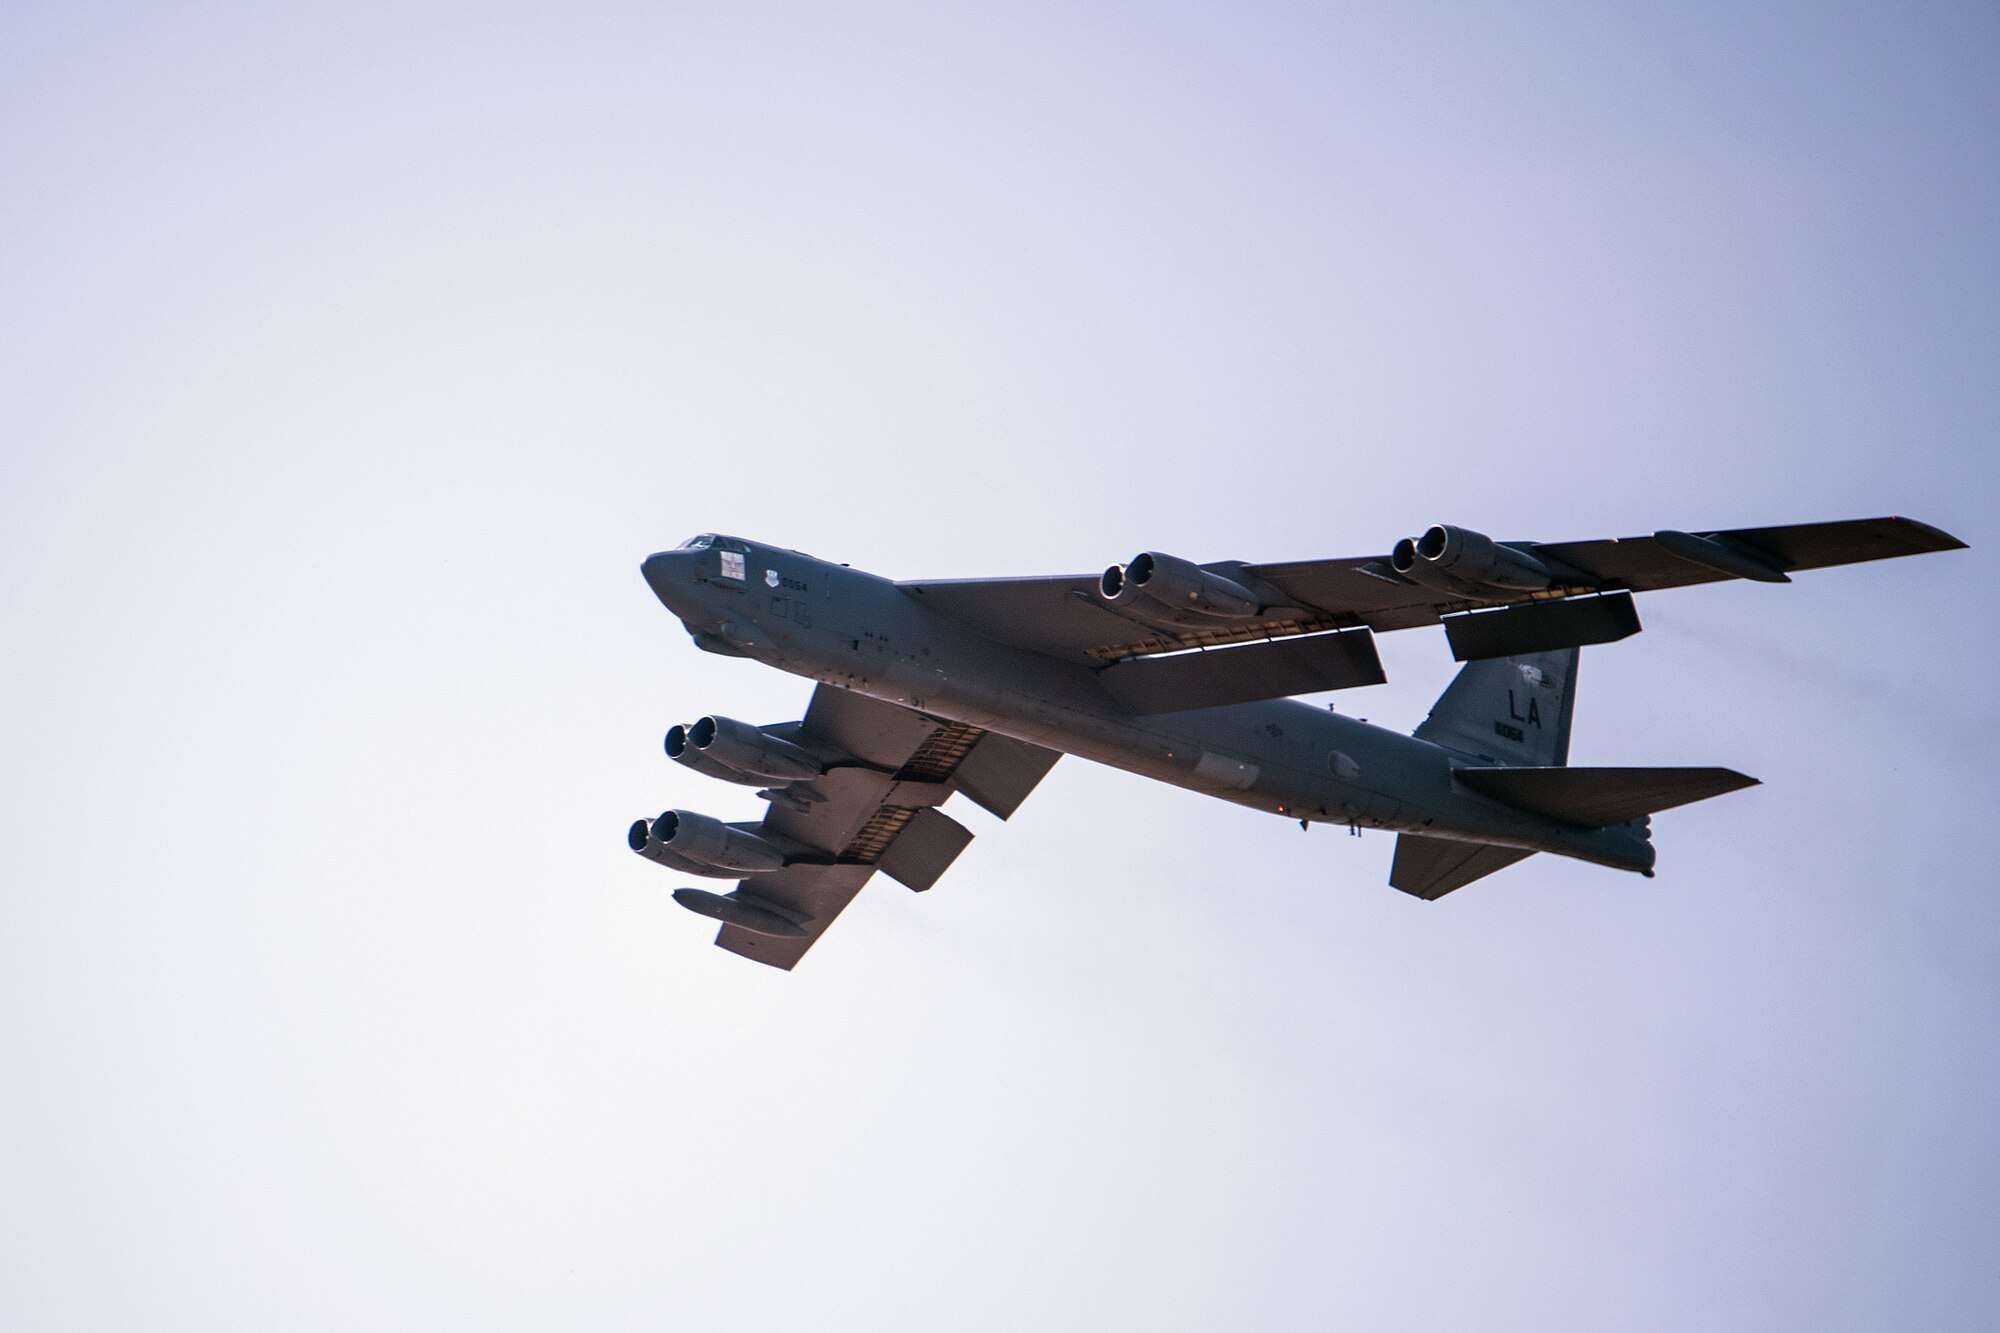 A B-52H Stratofortress from Barksdale Air Force Base, Louisiana, prepares to land, Aug. 26, 2020, at Minot Air Force Base, North Dakota. As the only other B-52 base, Minot has considerable infrastructure and support to ensure the Air Force Global Strike Command mission is not impacted.